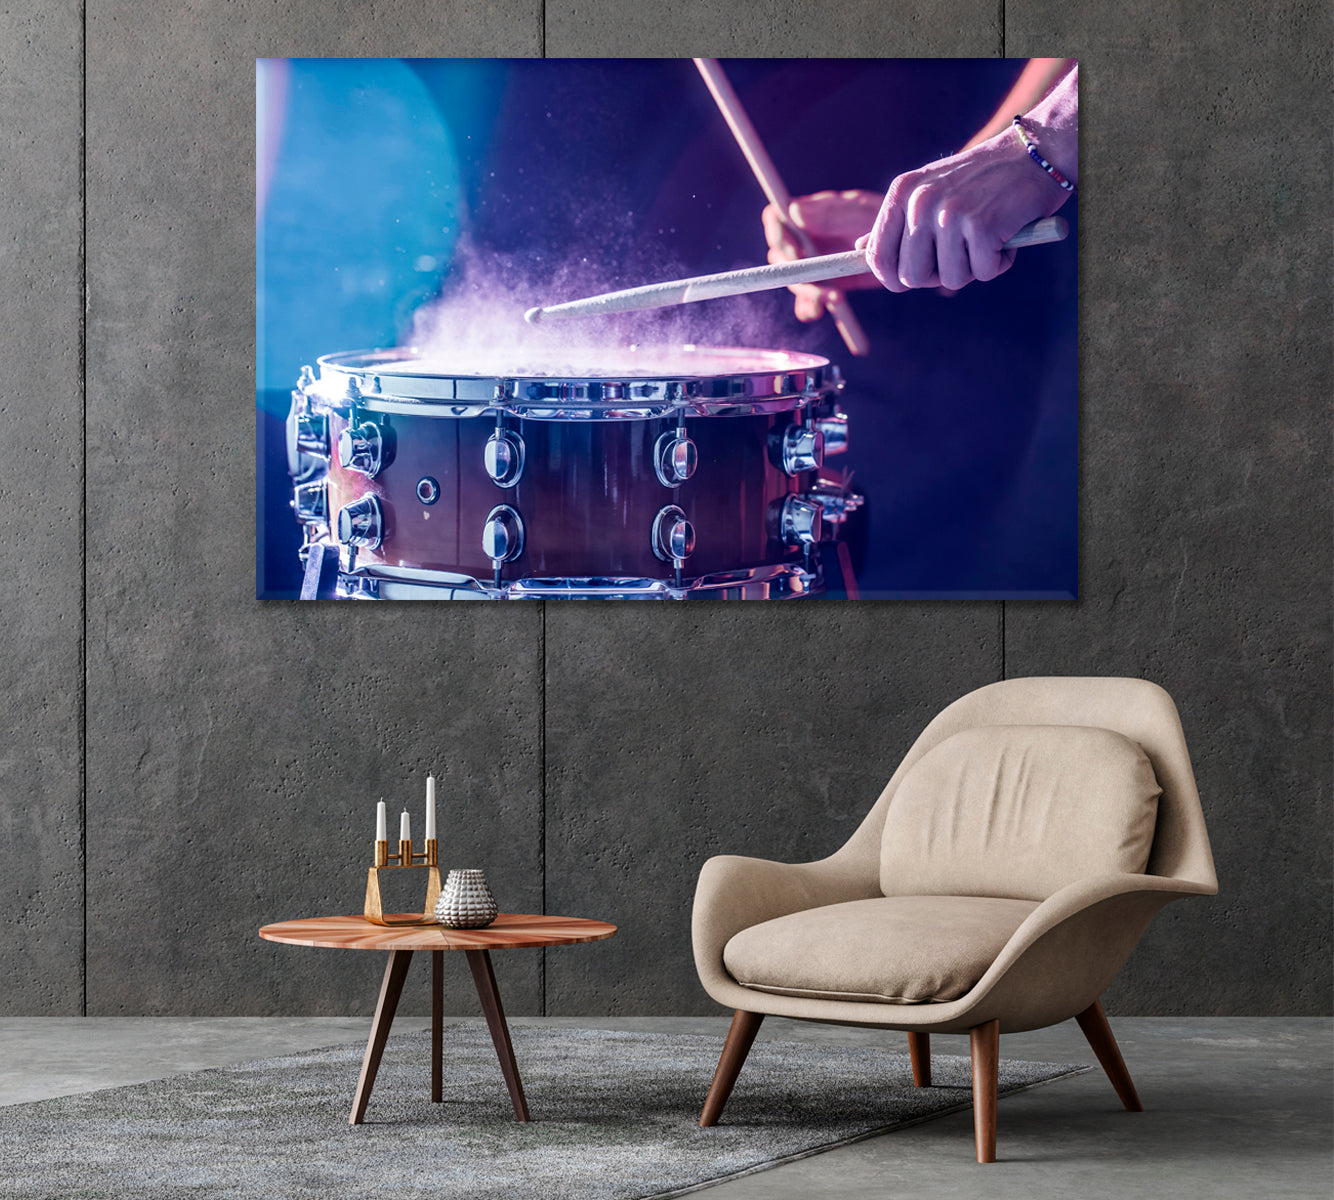 Close Up of Drummer's Hands While Playing Drums Canvas Print-Canvas Print-CetArt-1 Panel-24x16 inches-CetArt